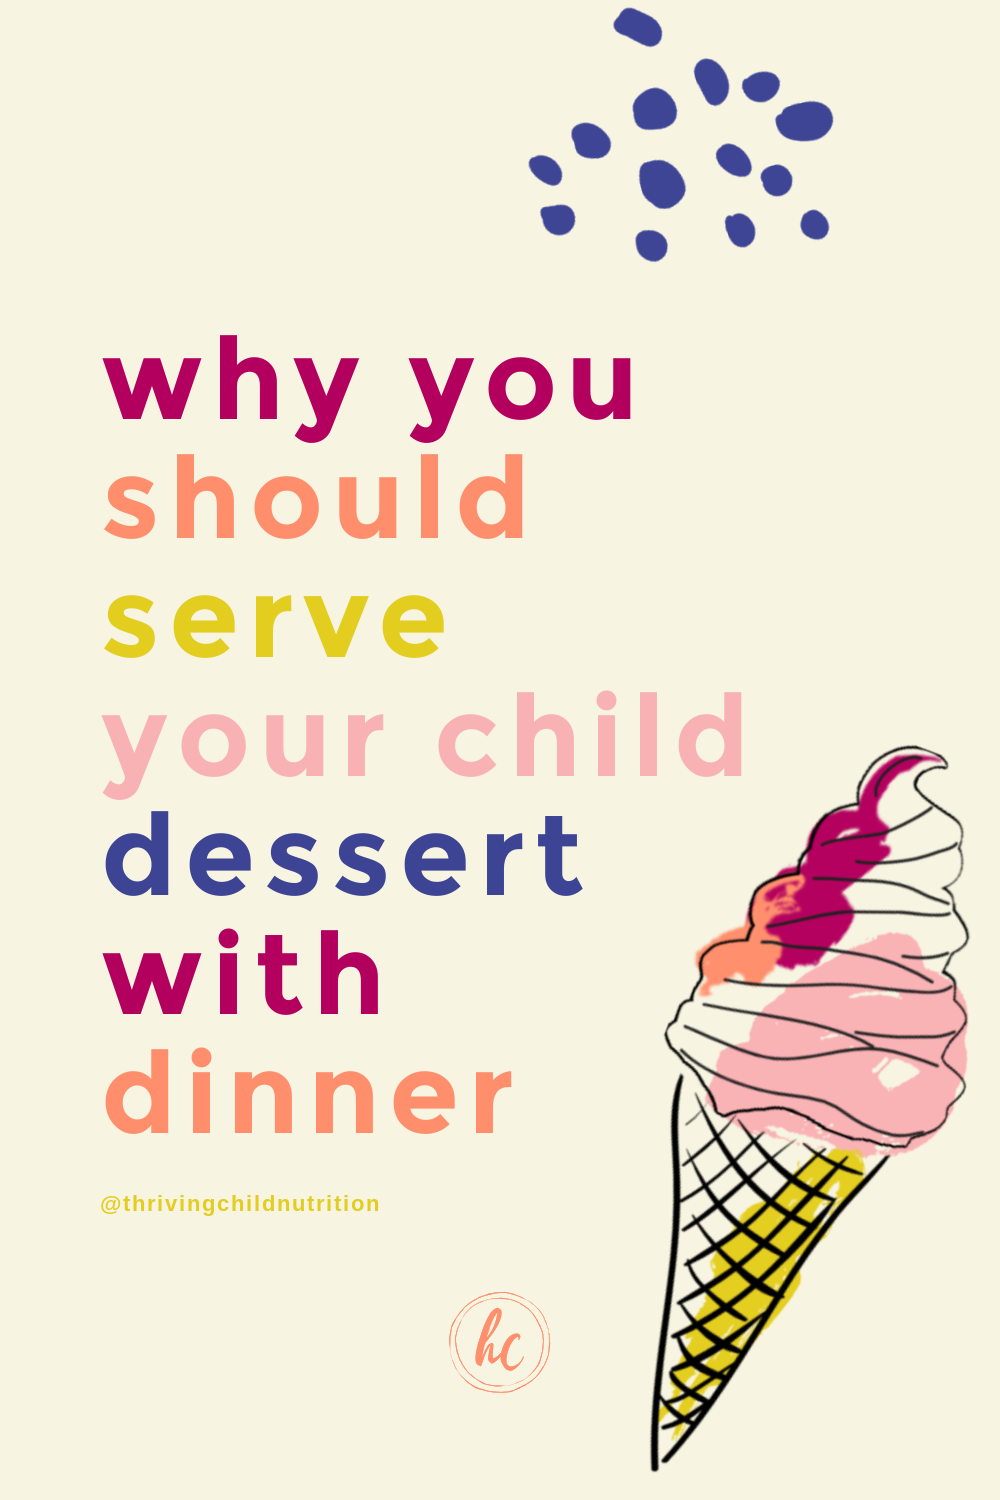 why you should serve your child dessert with dinner